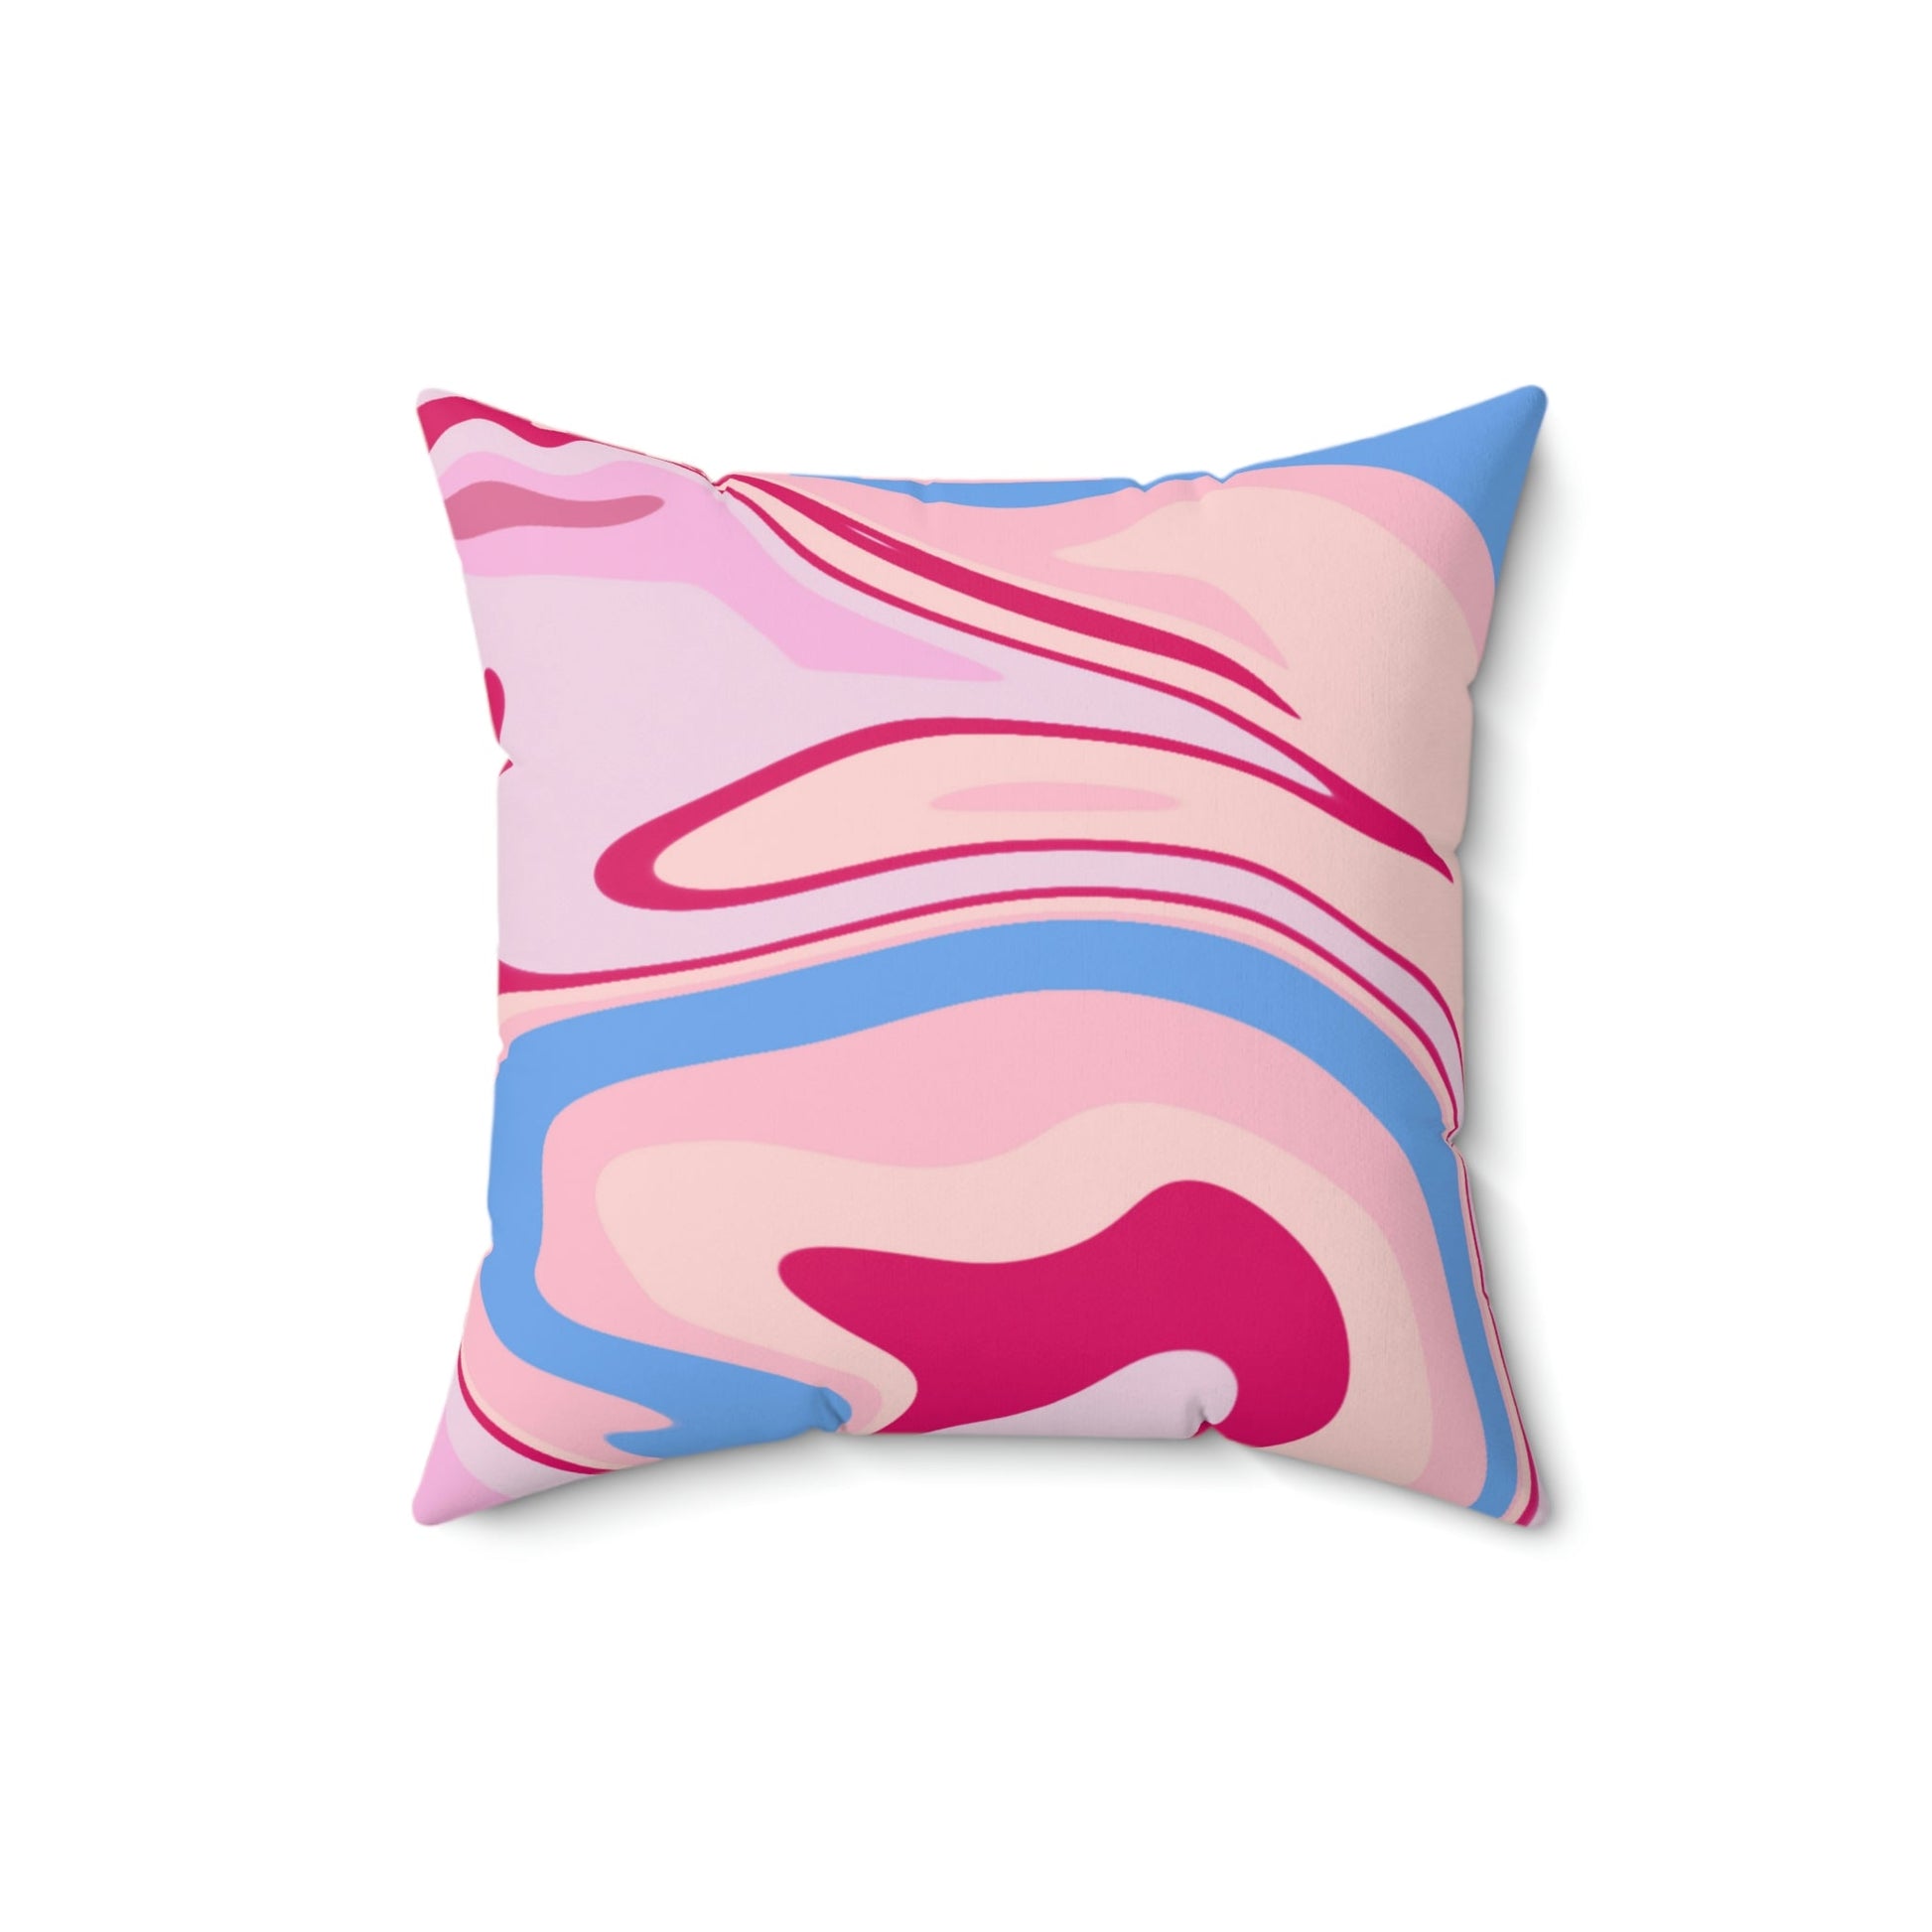 Melted Taffy Mix Square Pillow Home Decor Pink Sweetheart